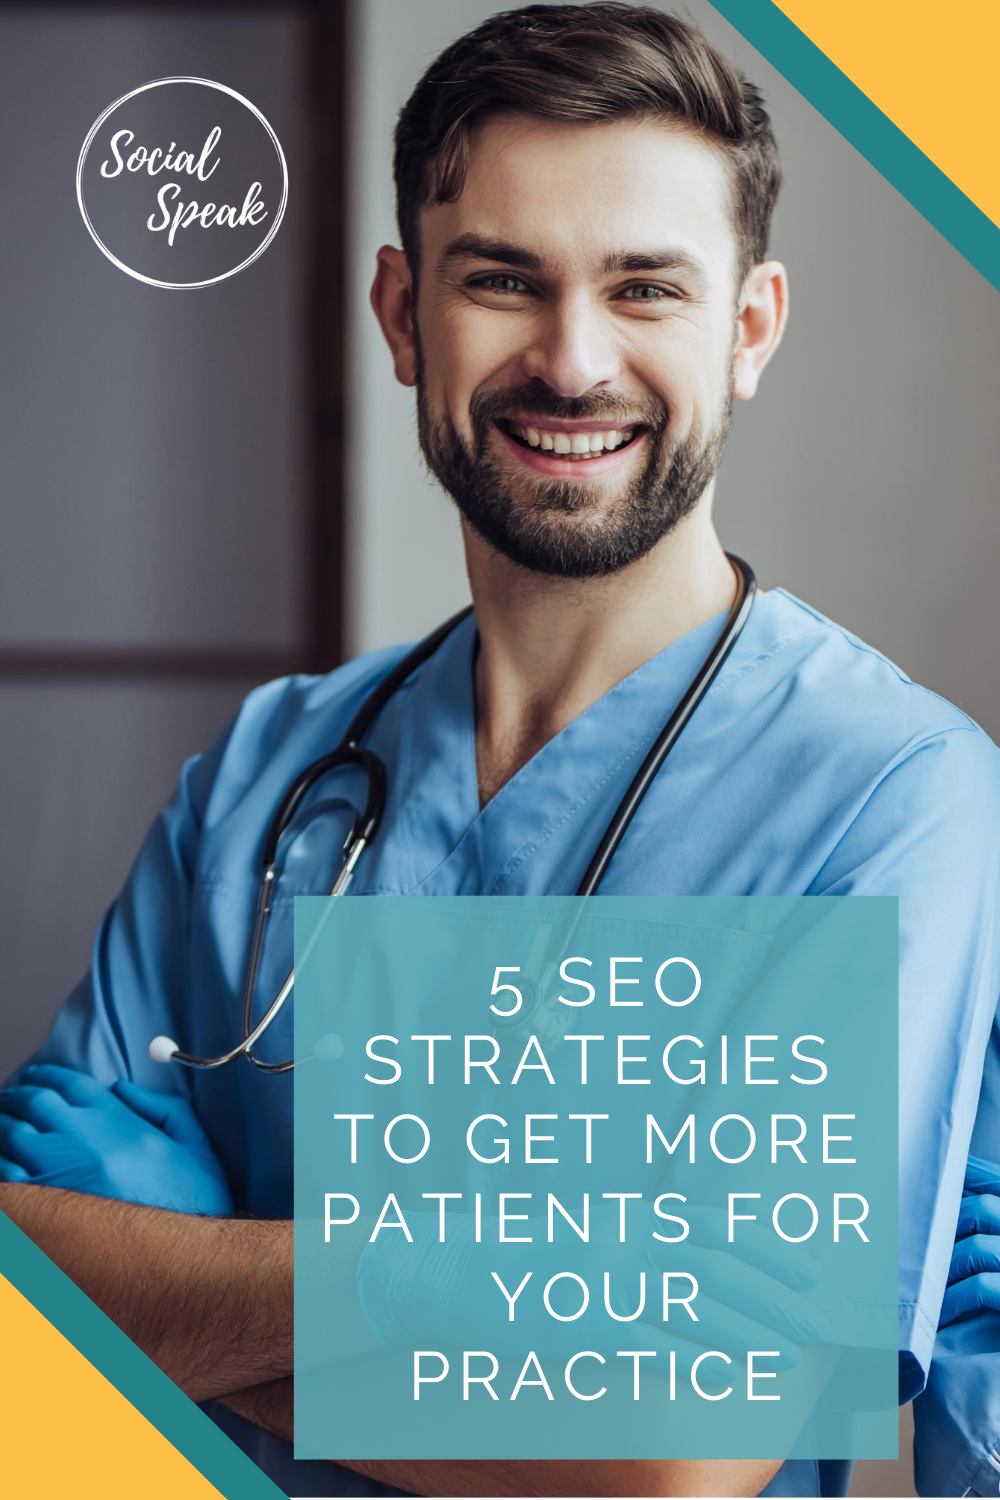 5 SEO Strategies to Get More Patients for Your Practice